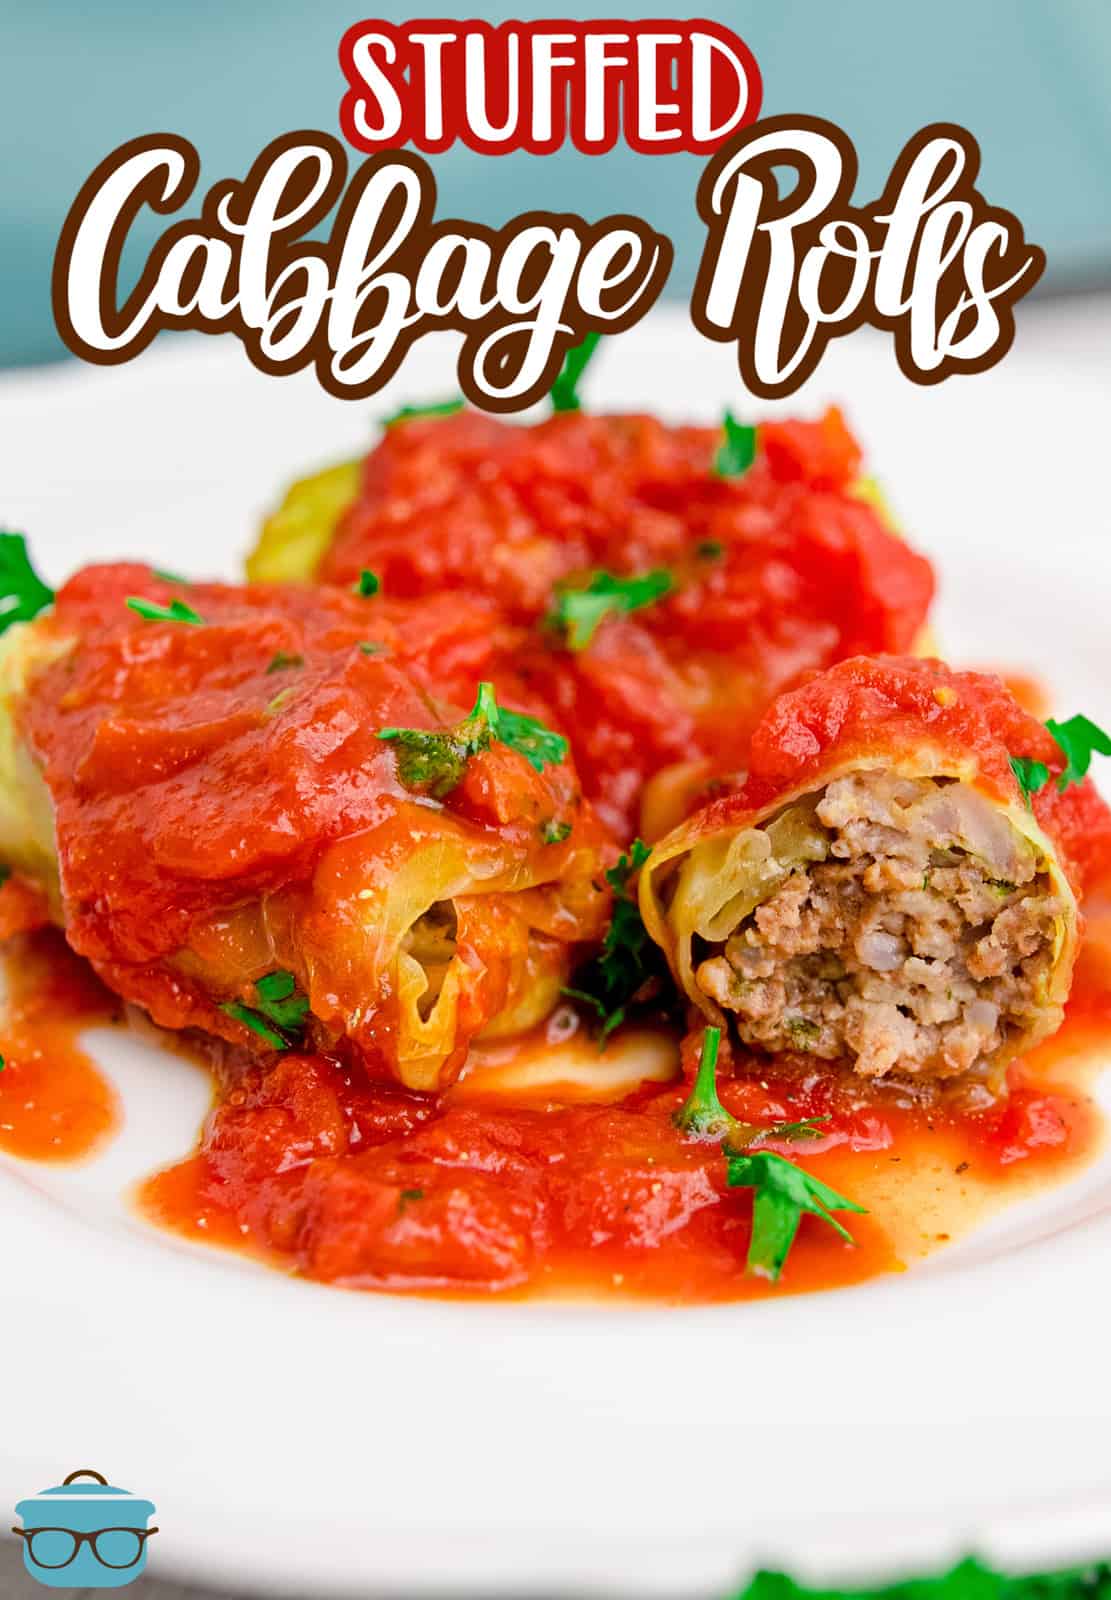 a cabbage roll cut in half to show the inside on a white plate with tomato sauce.